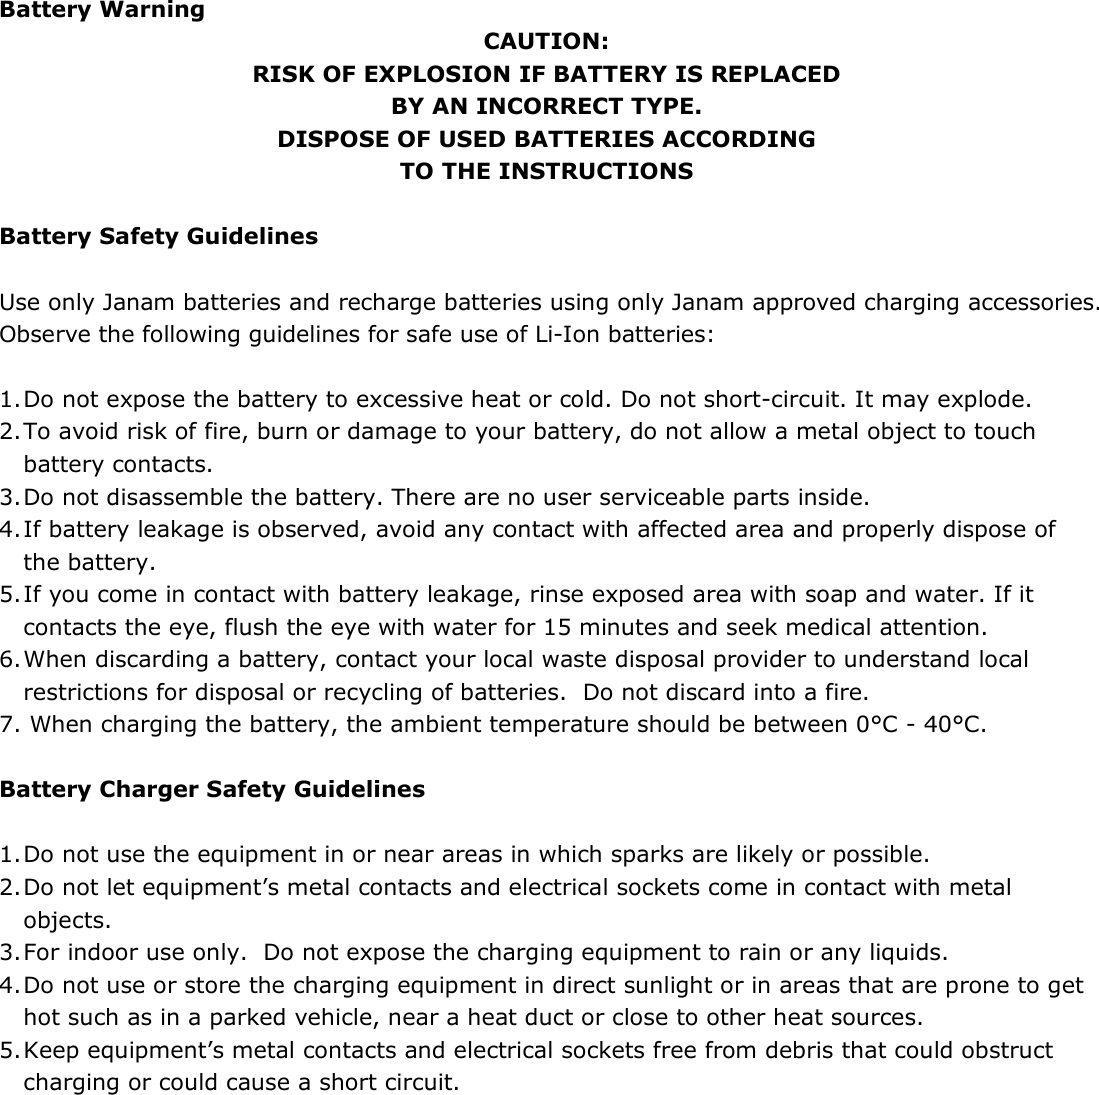  Battery Warning CAUTION: RISK OF EXPLOSION IF BATTERY IS REPLACED BY AN INCORRECT TYPE. DISPOSE OF USED BATTERIES ACCORDING TO THE INSTRUCTIONS  Battery Safety Guidelines  Use only Janam batteries and recharge batteries using only Janam approved charging accessories. Observe the following guidelines for safe use of Li-Ion batteries:  1. Do not expose the battery to excessive heat or cold. Do not short-circuit. It may explode. 2. To avoid risk of fire, burn or damage to your battery, do not allow a metal object to touch battery contacts. 3. Do not disassemble the battery. There are no user serviceable parts inside. 4. If battery leakage is observed, avoid any contact with affected area and properly dispose of the battery. 5. If you come in contact with battery leakage, rinse exposed area with soap and water. If it contacts the eye, flush the eye with water for 15 minutes and seek medical attention. 6. When discarding a battery, contact your local waste disposal provider to understand local restrictions for disposal or recycling of batteries.  Do not discard into a fire. 7. When charging the battery, the ambient temperature should be between 0°C - 40°C.  Battery Charger Safety Guidelines  1. Do not use the equipment in or near areas in which sparks are likely or possible. 2. Do not let equipment’s metal contacts and electrical sockets come in contact with metal objects. 3. For indoor use only.  Do not expose the charging equipment to rain or any liquids. 4. Do not use or store the charging equipment in direct sunlight or in areas that are prone to get hot such as in a parked vehicle, near a heat duct or close to other heat sources. 5. Keep equipment’s metal contacts and electrical sockets free from debris that could obstruct charging or could cause a short circuit. 